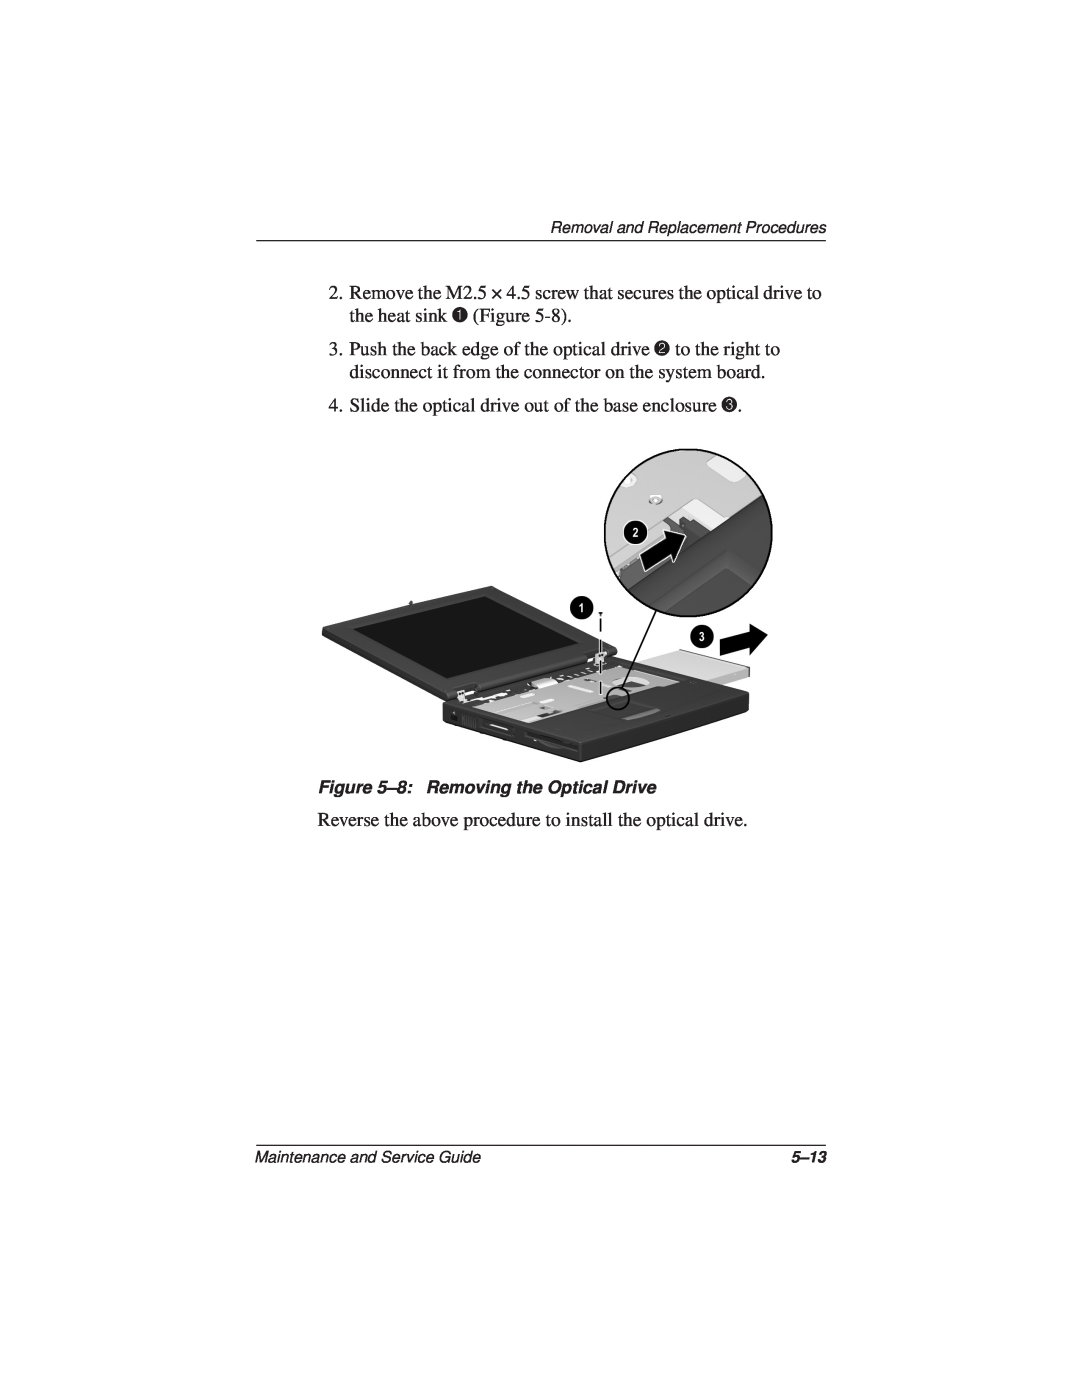 Compaq N110 manual Slide the optical drive out of the base enclosure 